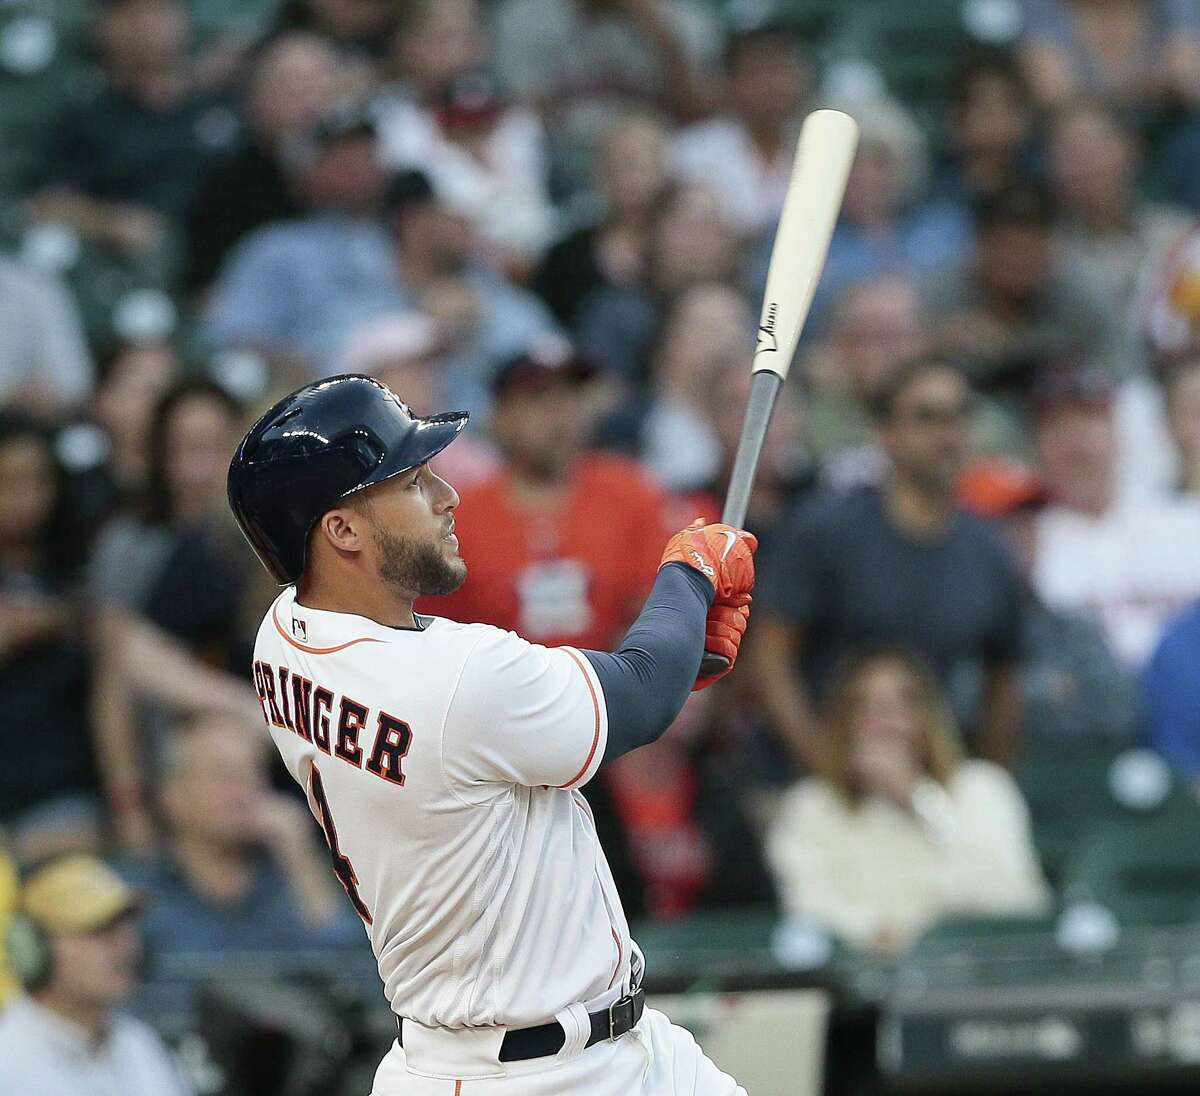 Astros outfielder George Springer hits a homer in the first inning against the Seattle Mariners at Minute Maid Park on Thursday. (Photo by Bob Levey/Getty Images)